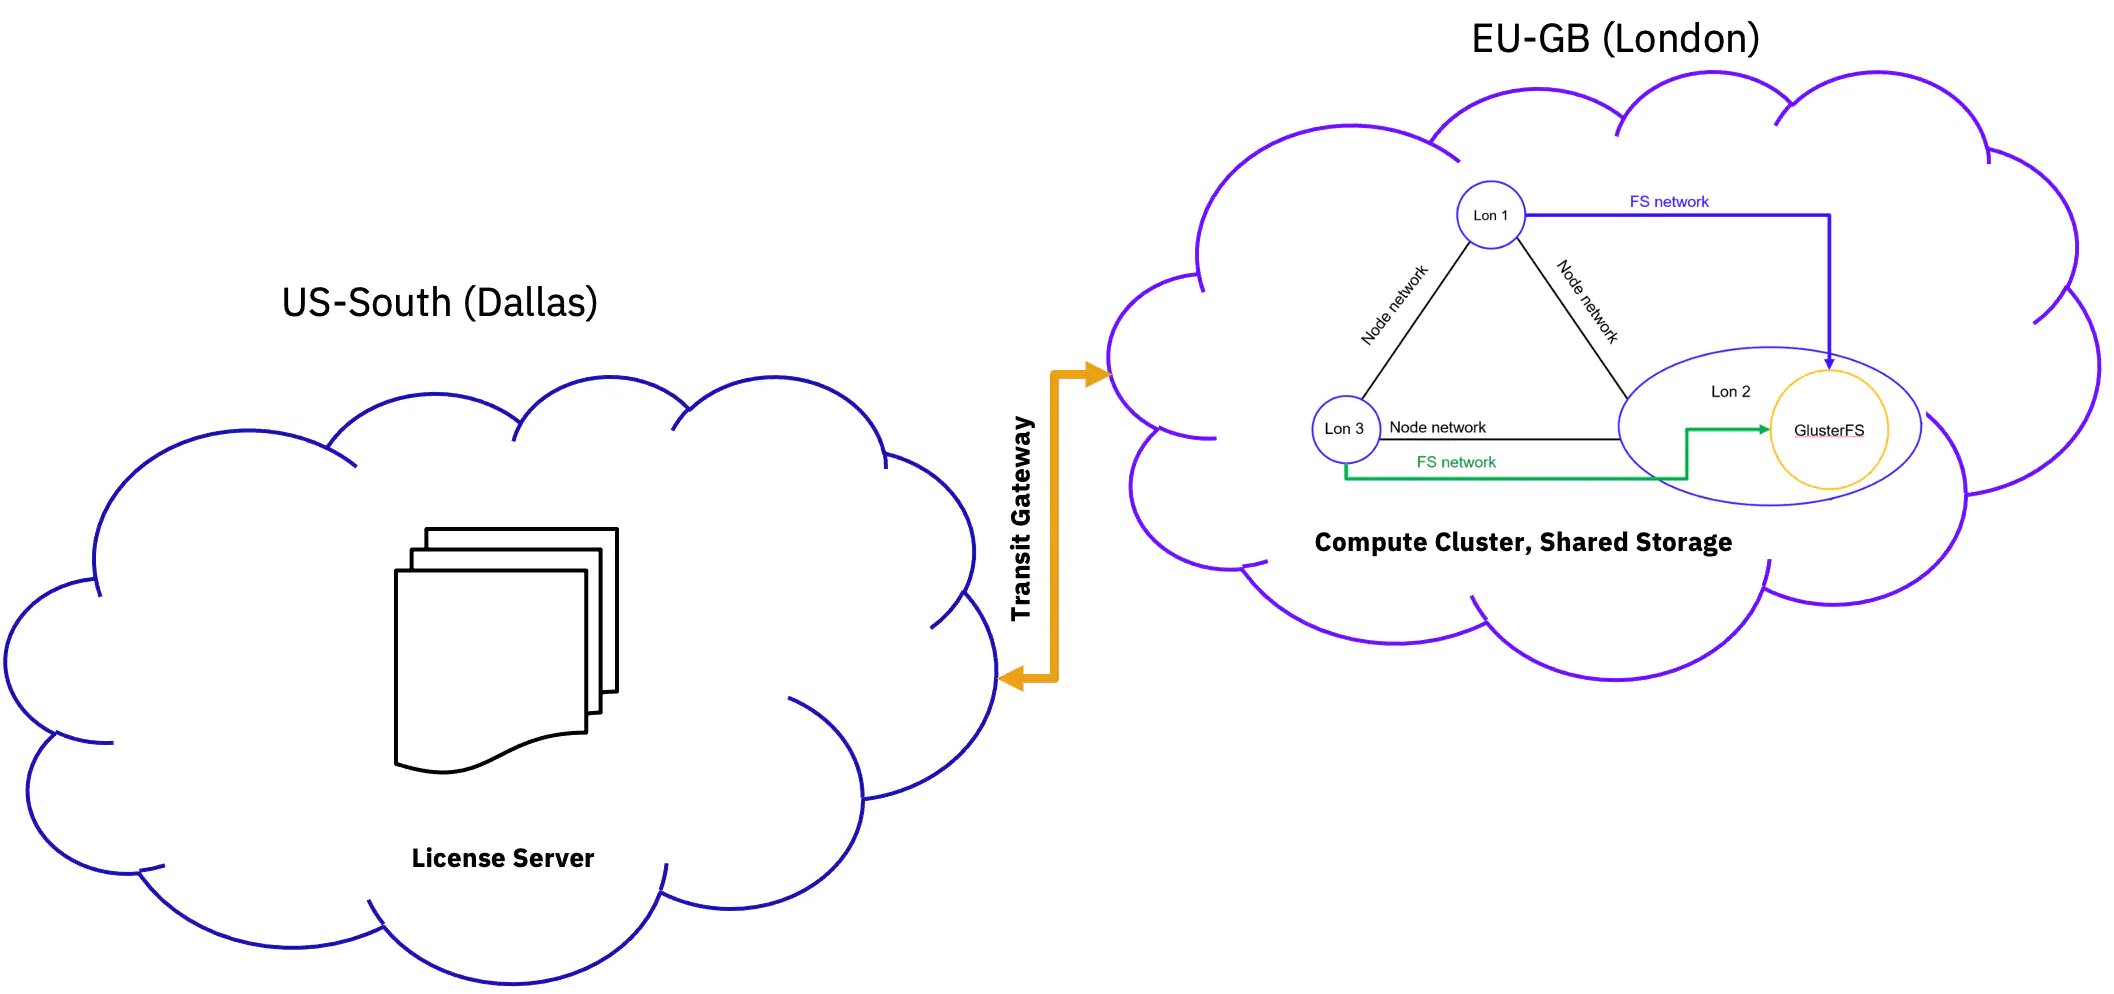 Diagram representing the configuration of OPC execution environment in IBM Cloud. OPC software license manager is configured in the US-South region of IBM Cloud. The OPC simulations are configured to run the European region in the Great Britain (EU-GB). The simulation agents connect to the license manager using an IBM Cloud service called Transit Gateway. Transit Gateway allows virtual private clouds in different regions of IBM Cloud to connect and communicate with each other over the IBM Cloud private backbone.